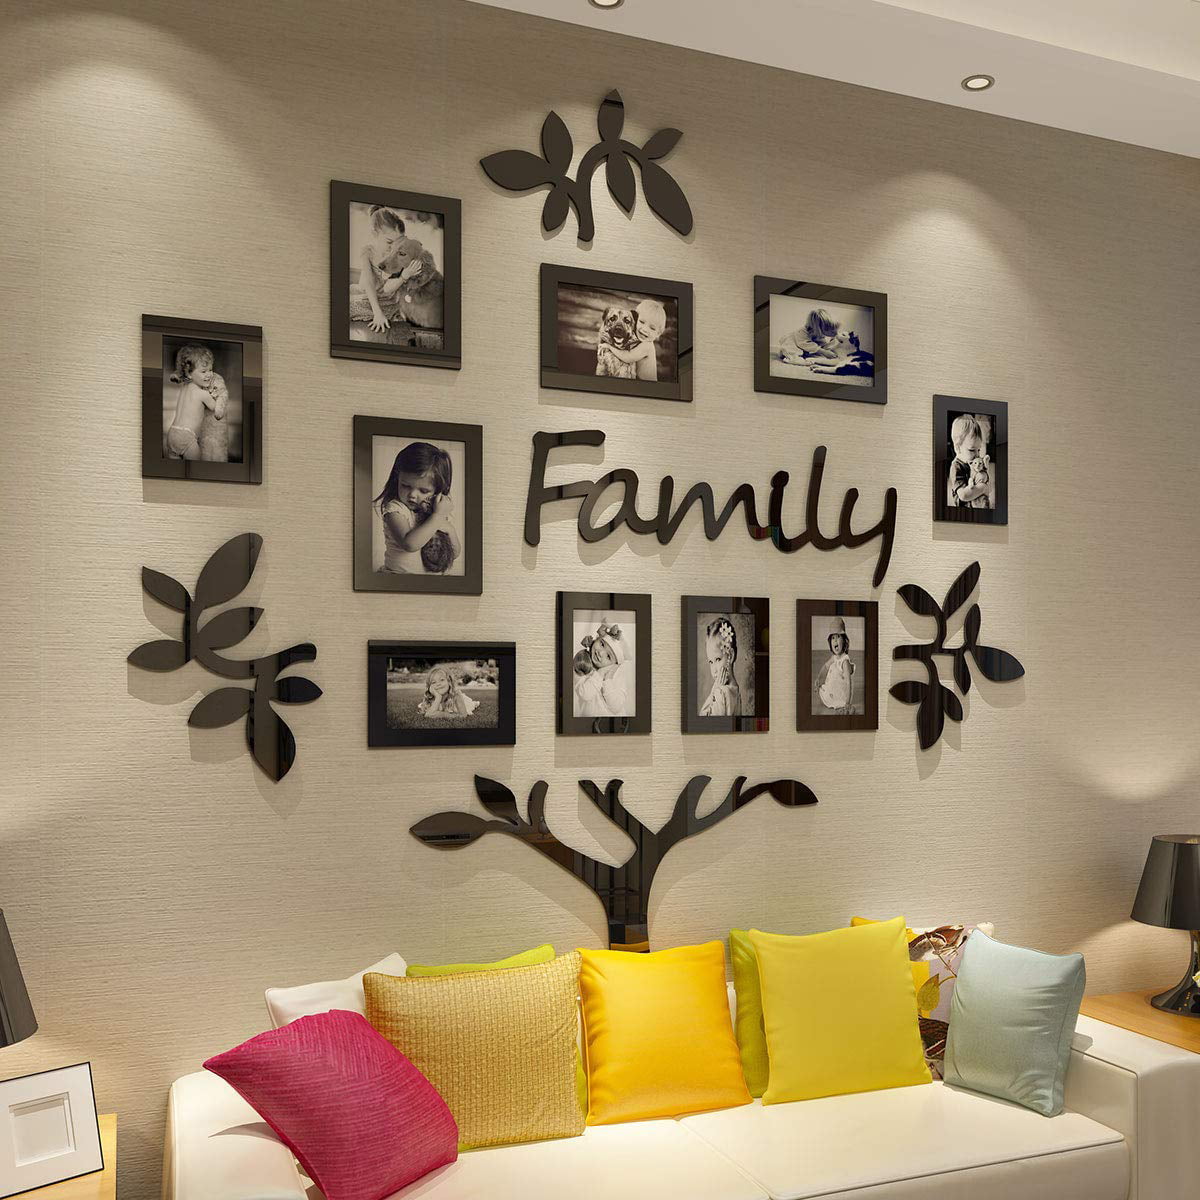 CrazyDeal Family Tree Wall Decal Picture Frame Collage 3D DIY Stickers Decorations Art for Living Room Home Decor Gallery Large 